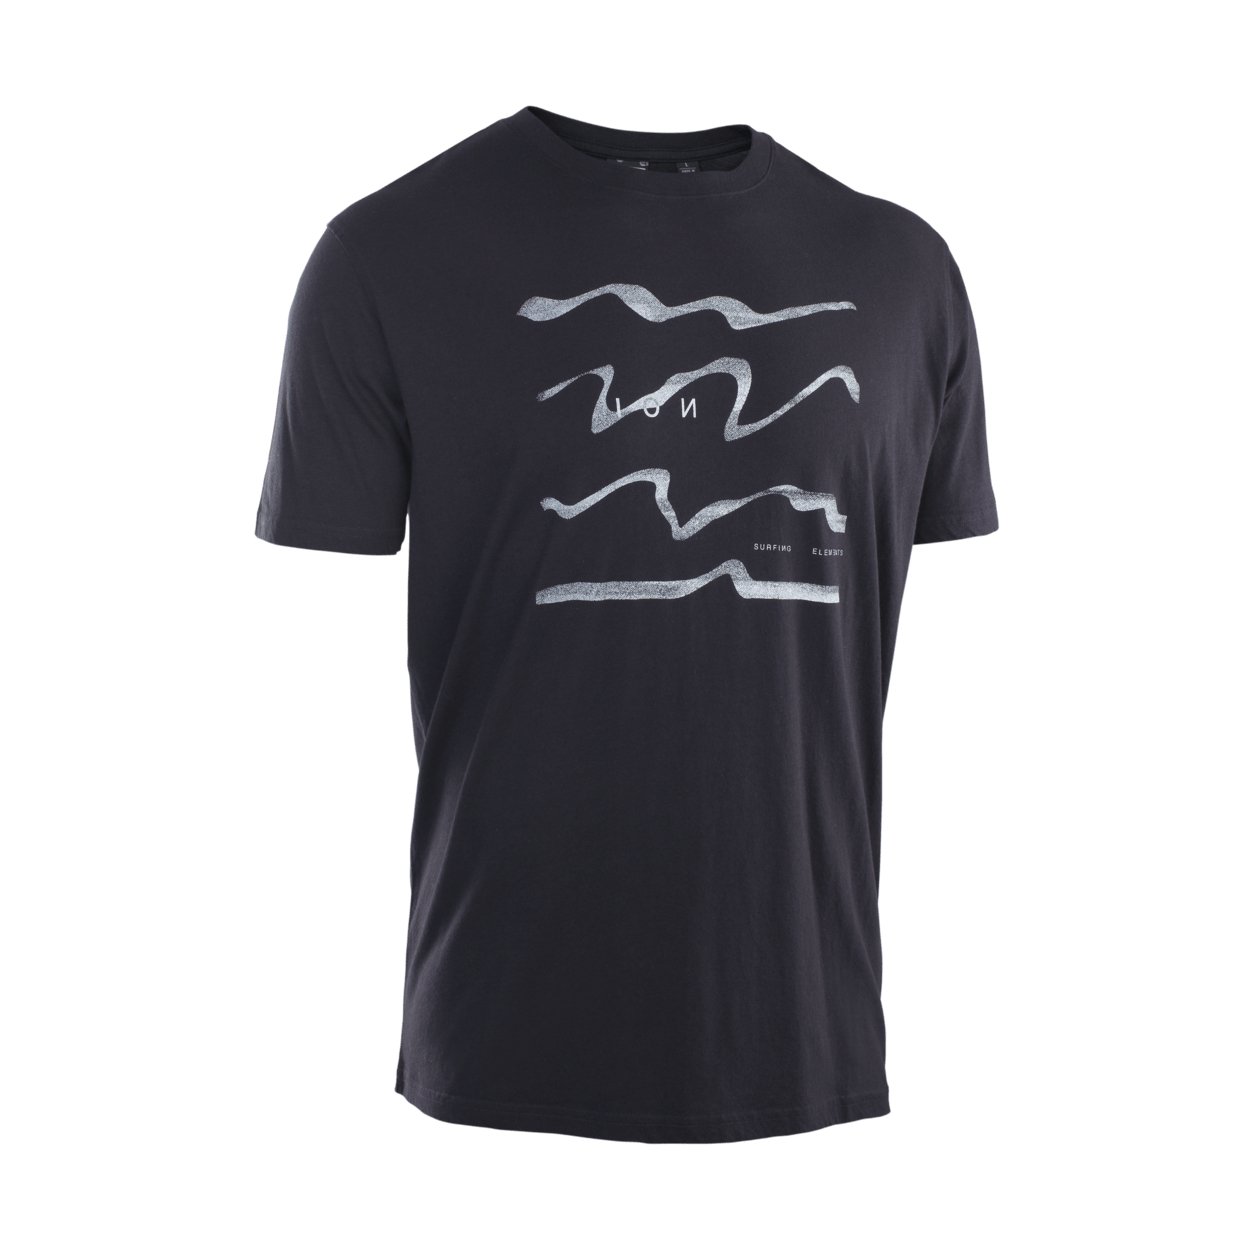 ION Tee Addicted SS men 2023 - Worthing Watersports - 9010583102351 - Apparel - ION Bike